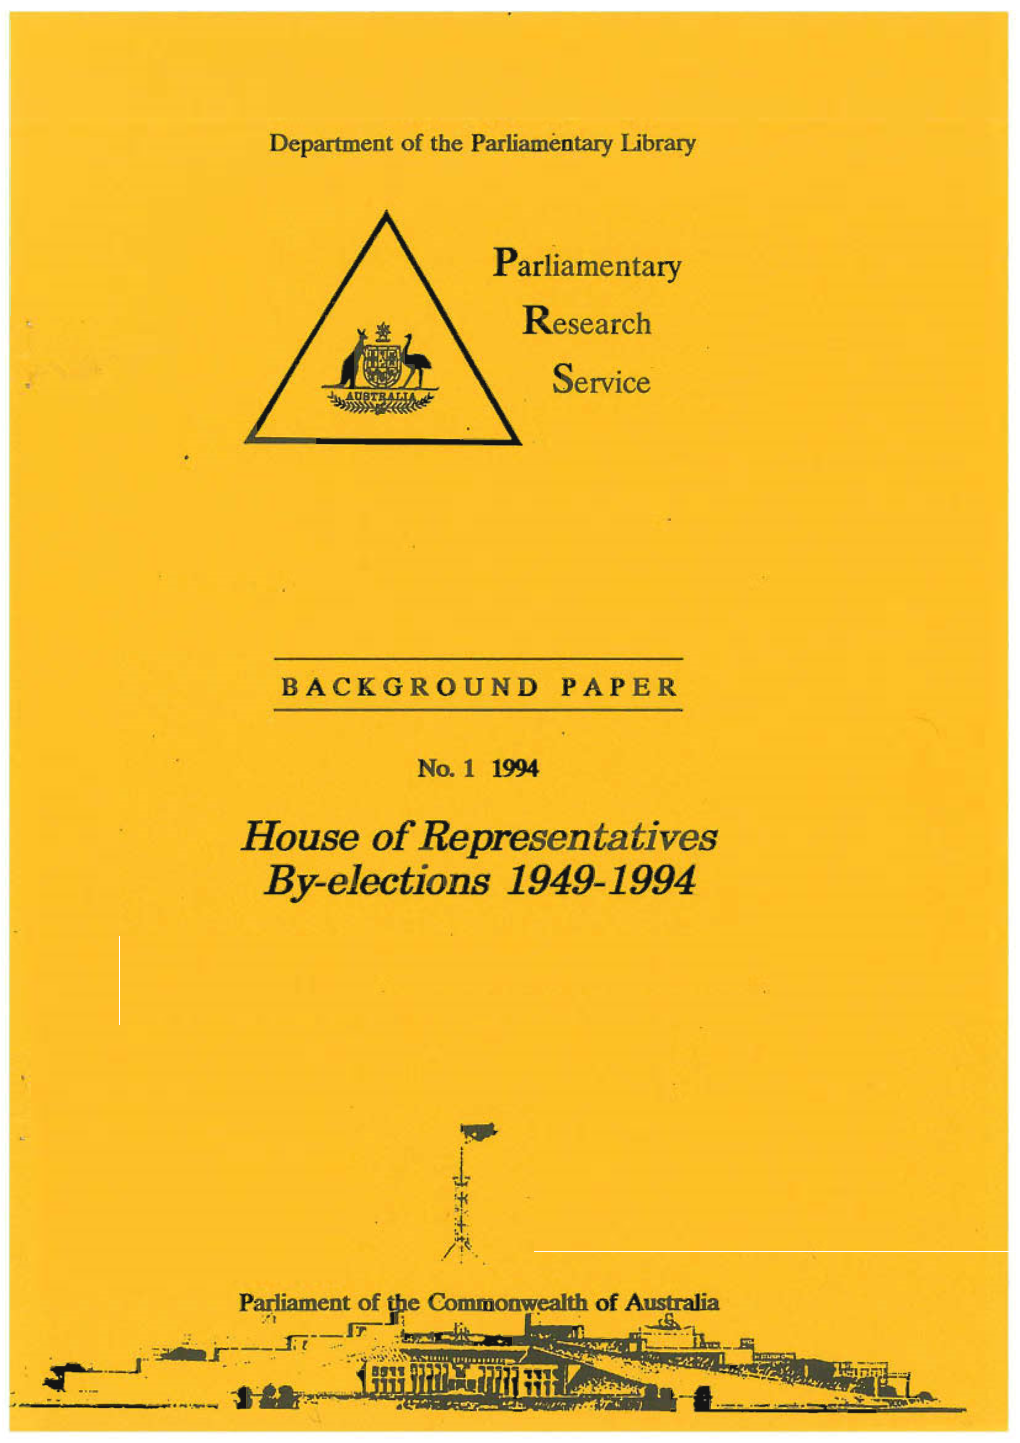 House of Representative by Elections 1949-1994